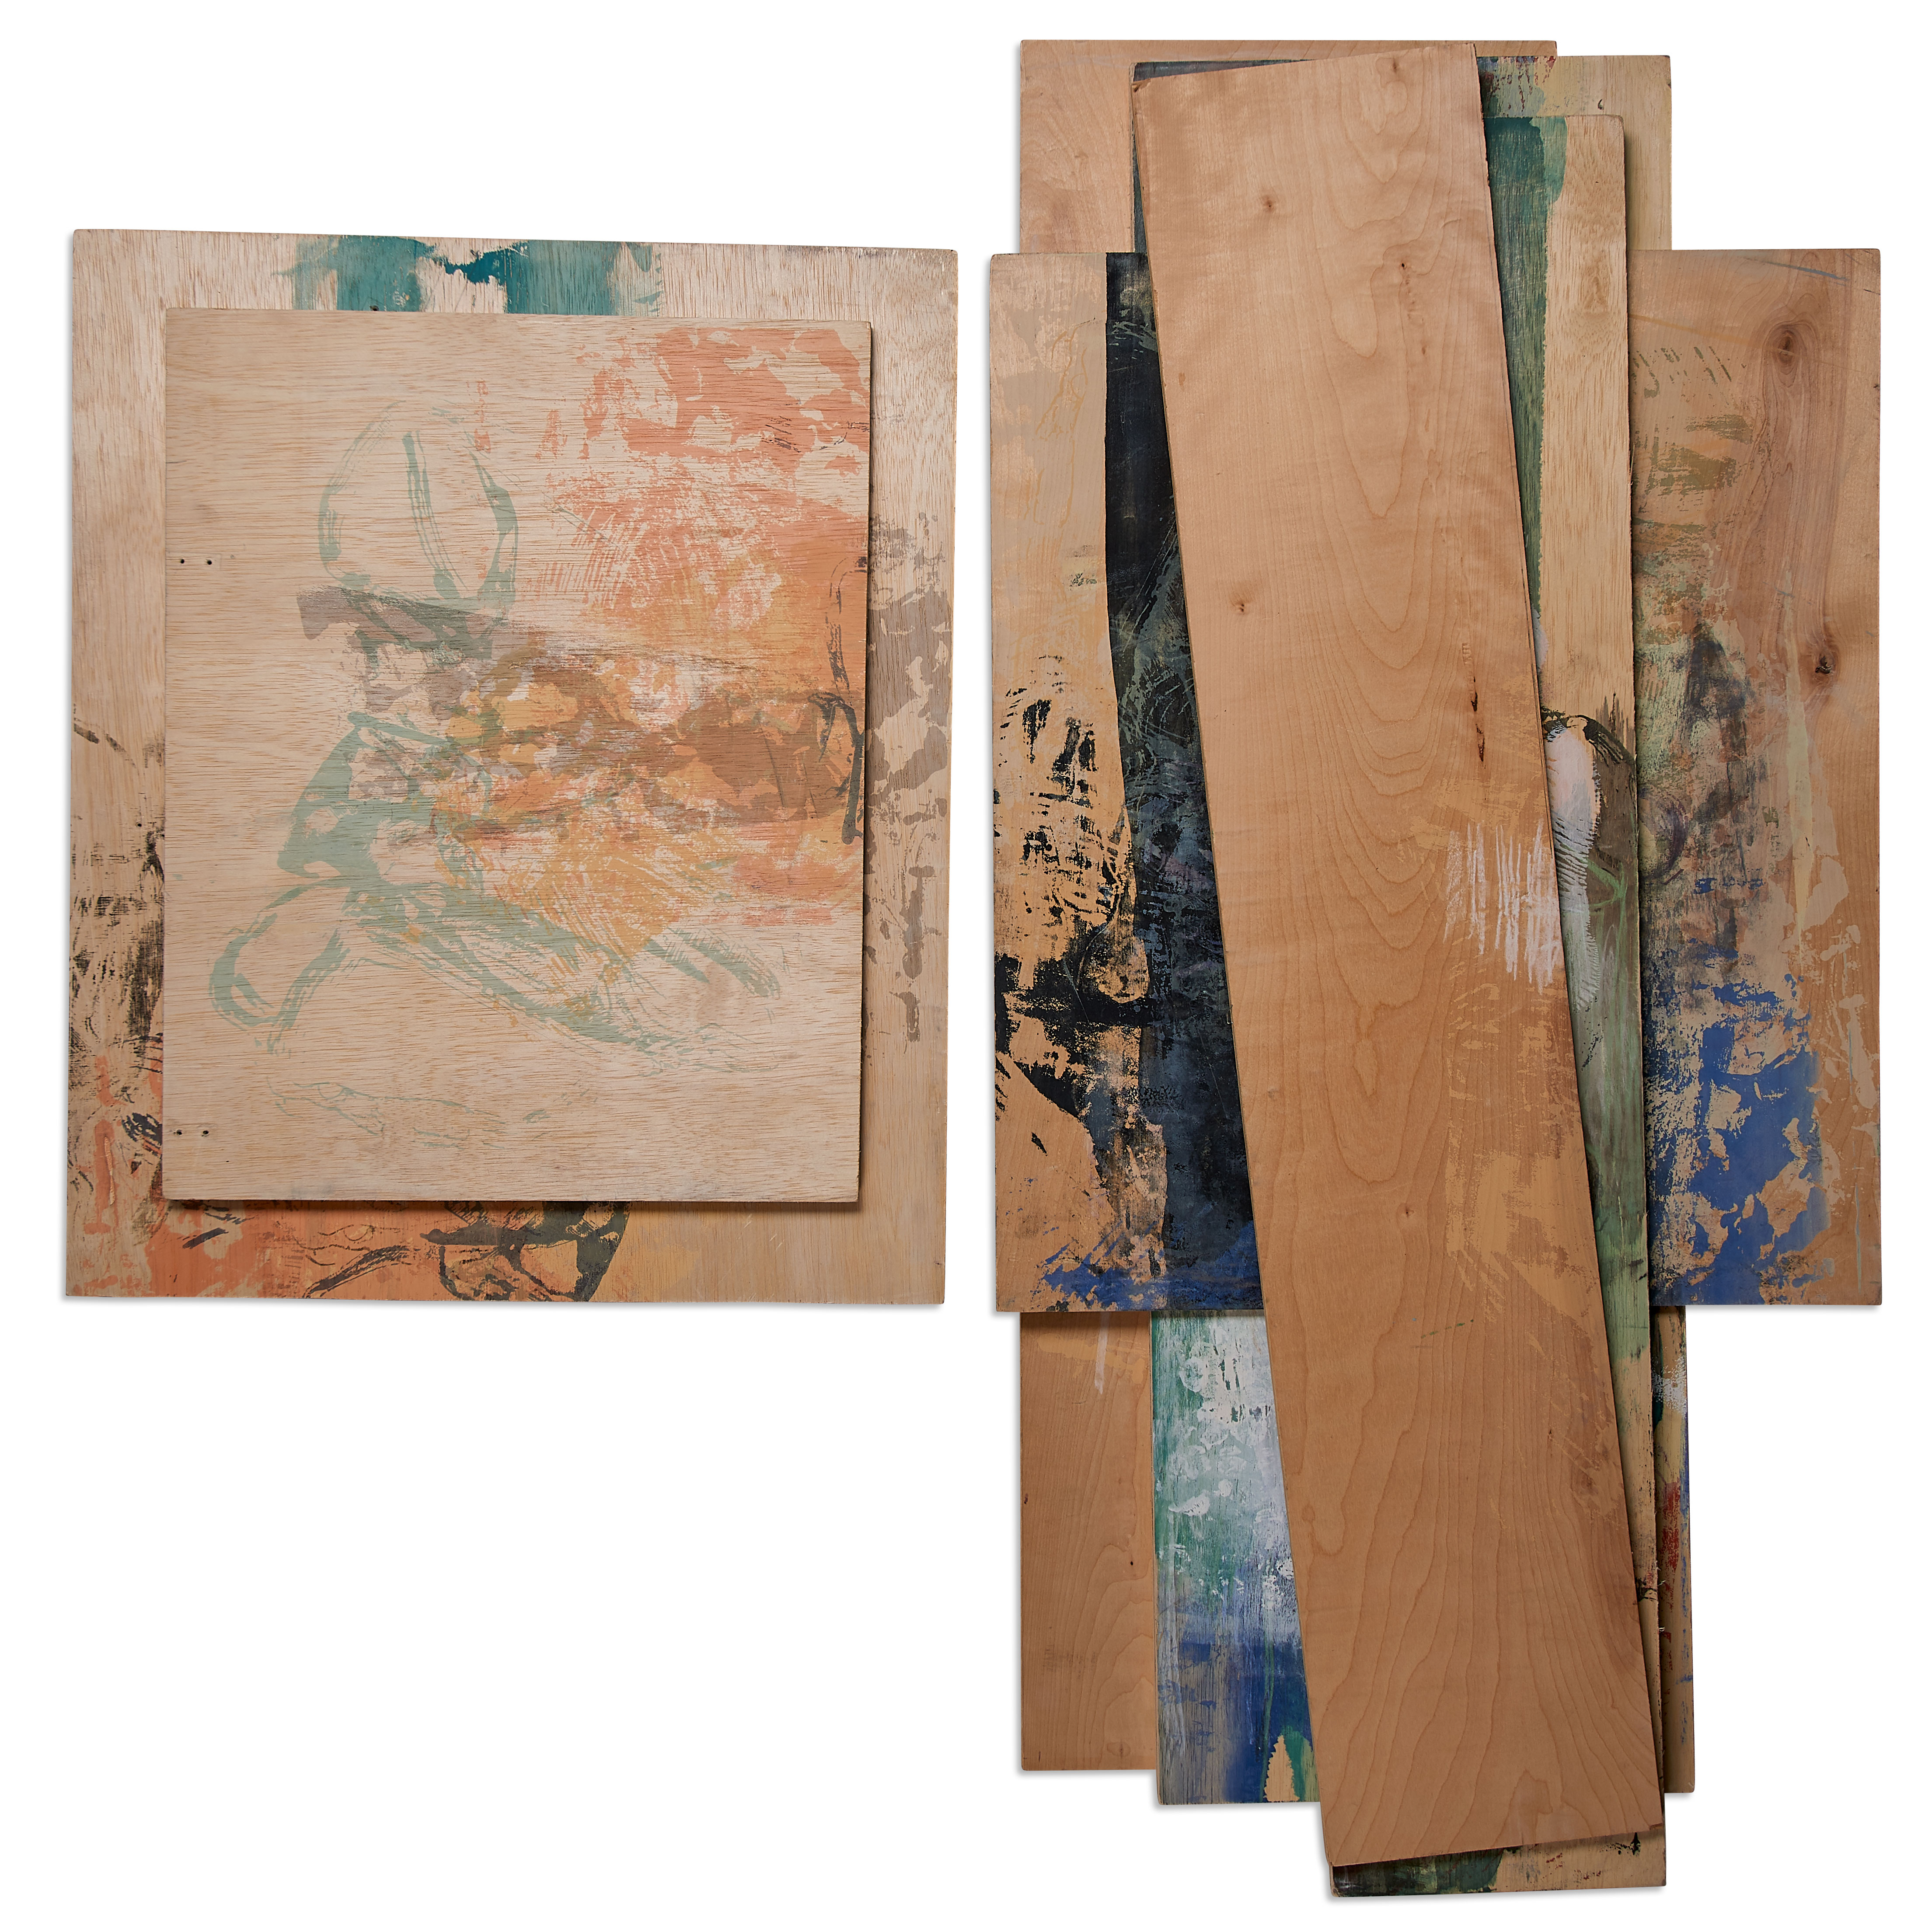 Photograph of an artwork by artist Caroline Coolidge showing two plywood stacks, a smaller one on the left. The plywood has screen-printed abstract imagery across it, but it is still possible to see the original texture and color of the wood.